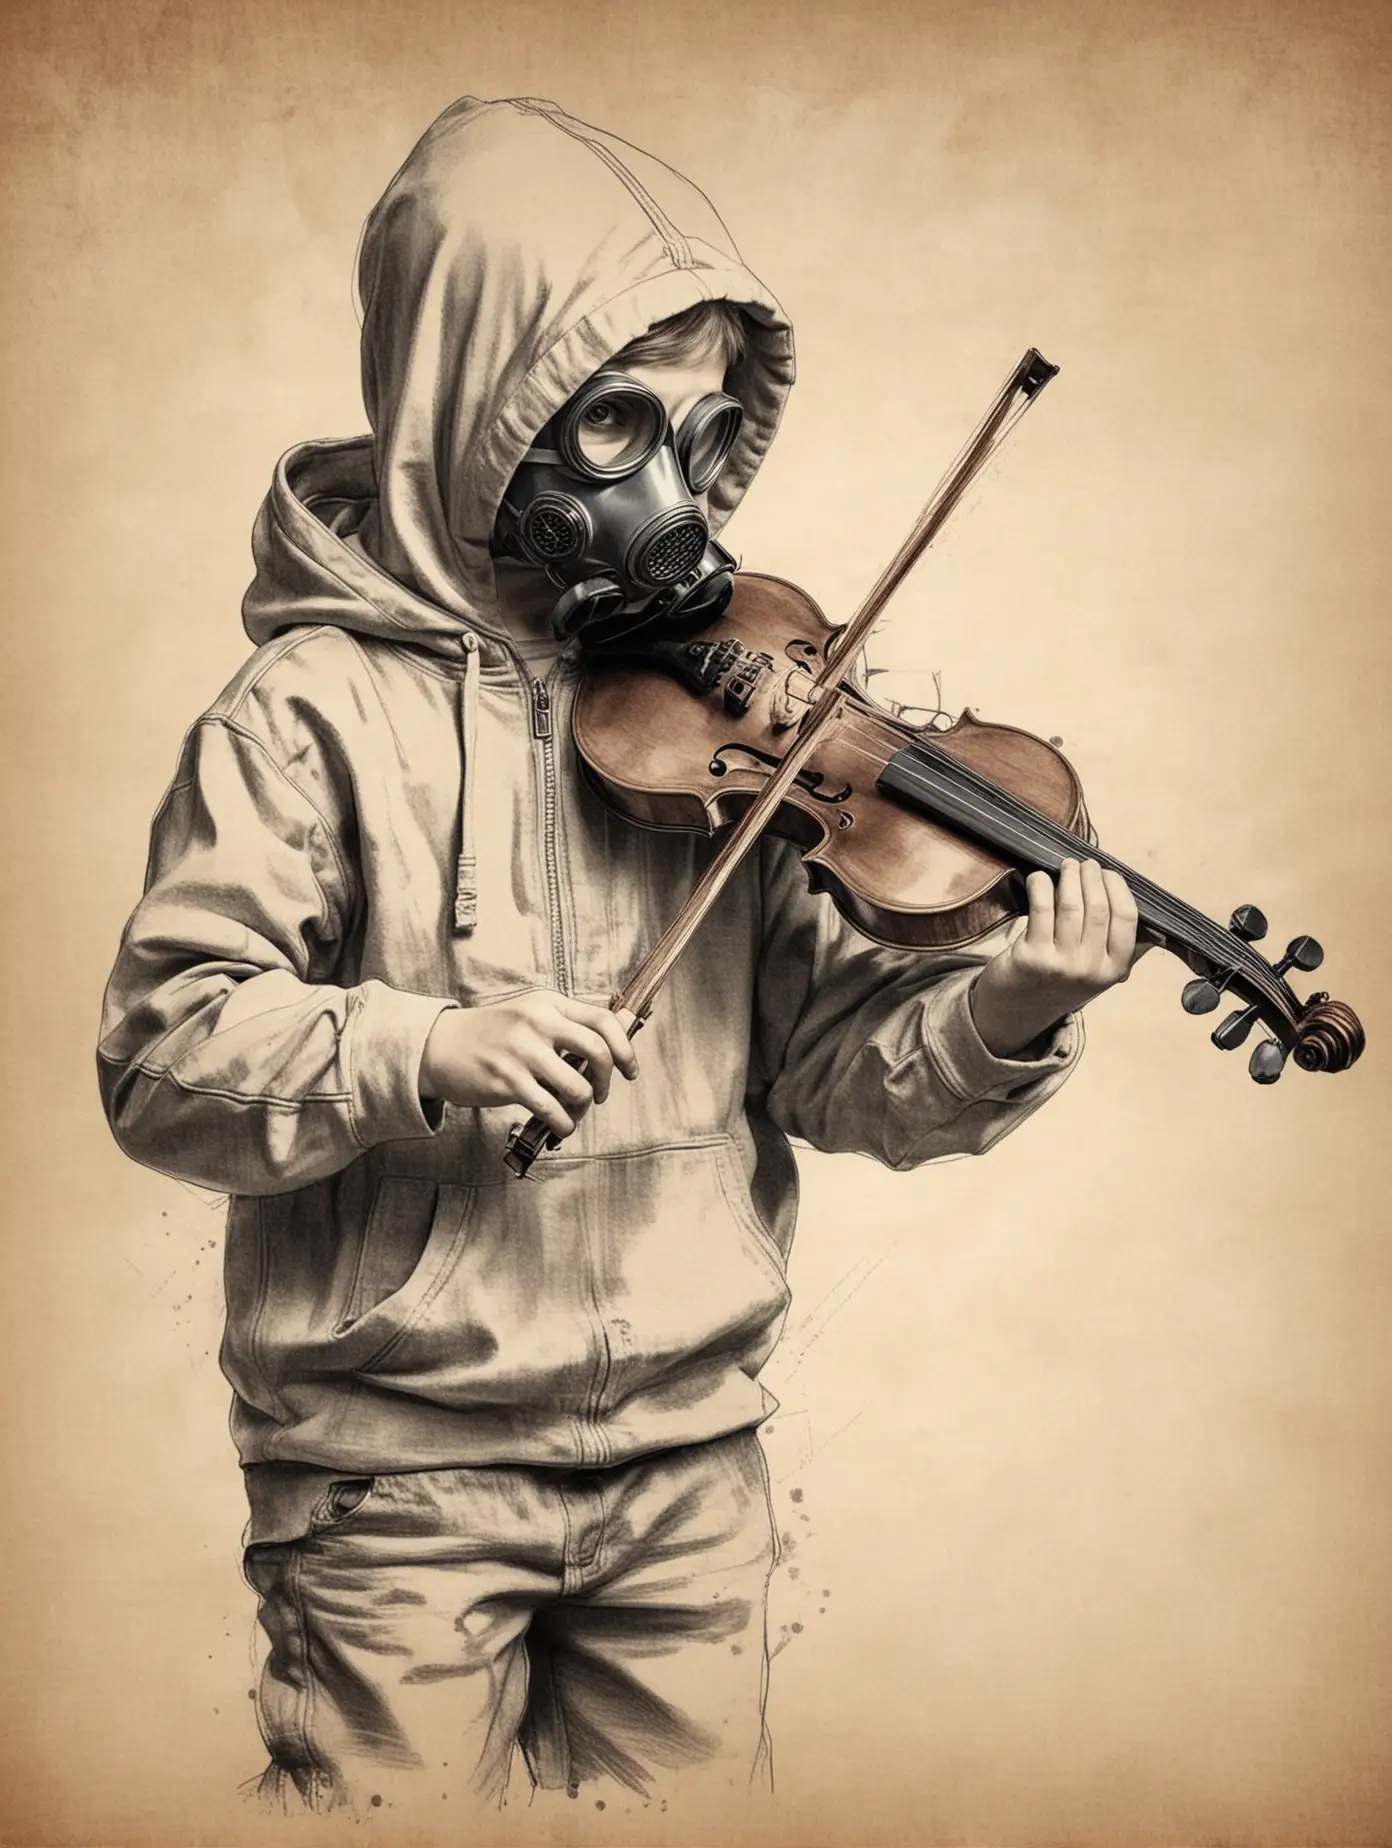 Little boy with Gas mask wearing hoodie and playing violin sketch 